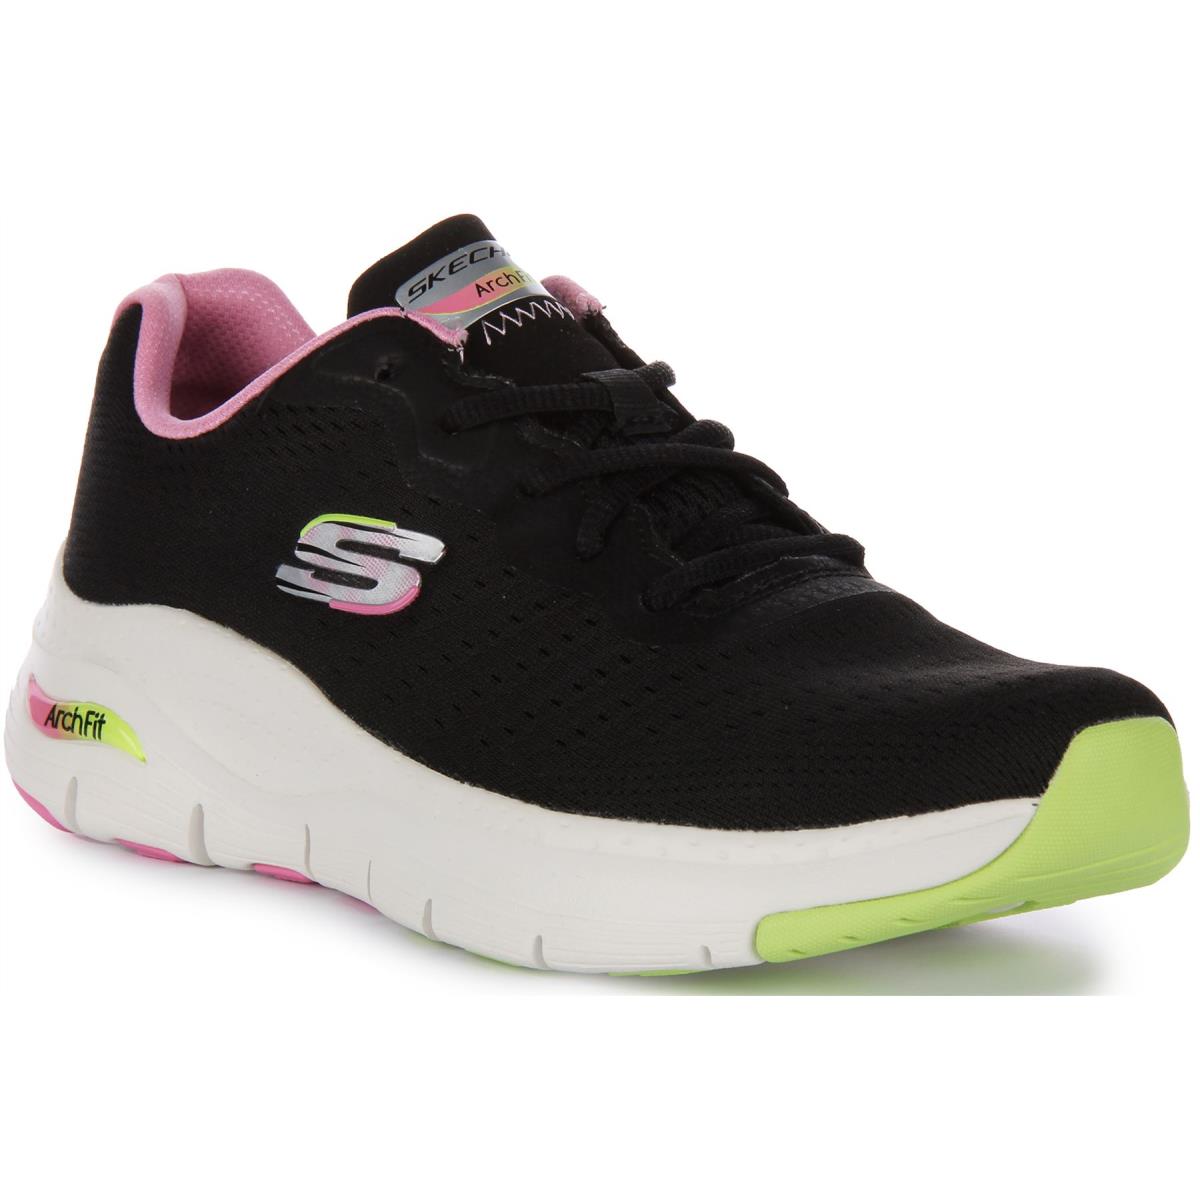 Skechers Arch Fit Infinity Cool Comfort Shoe Black Pink Womens US 5 - 10 BLACK PINK